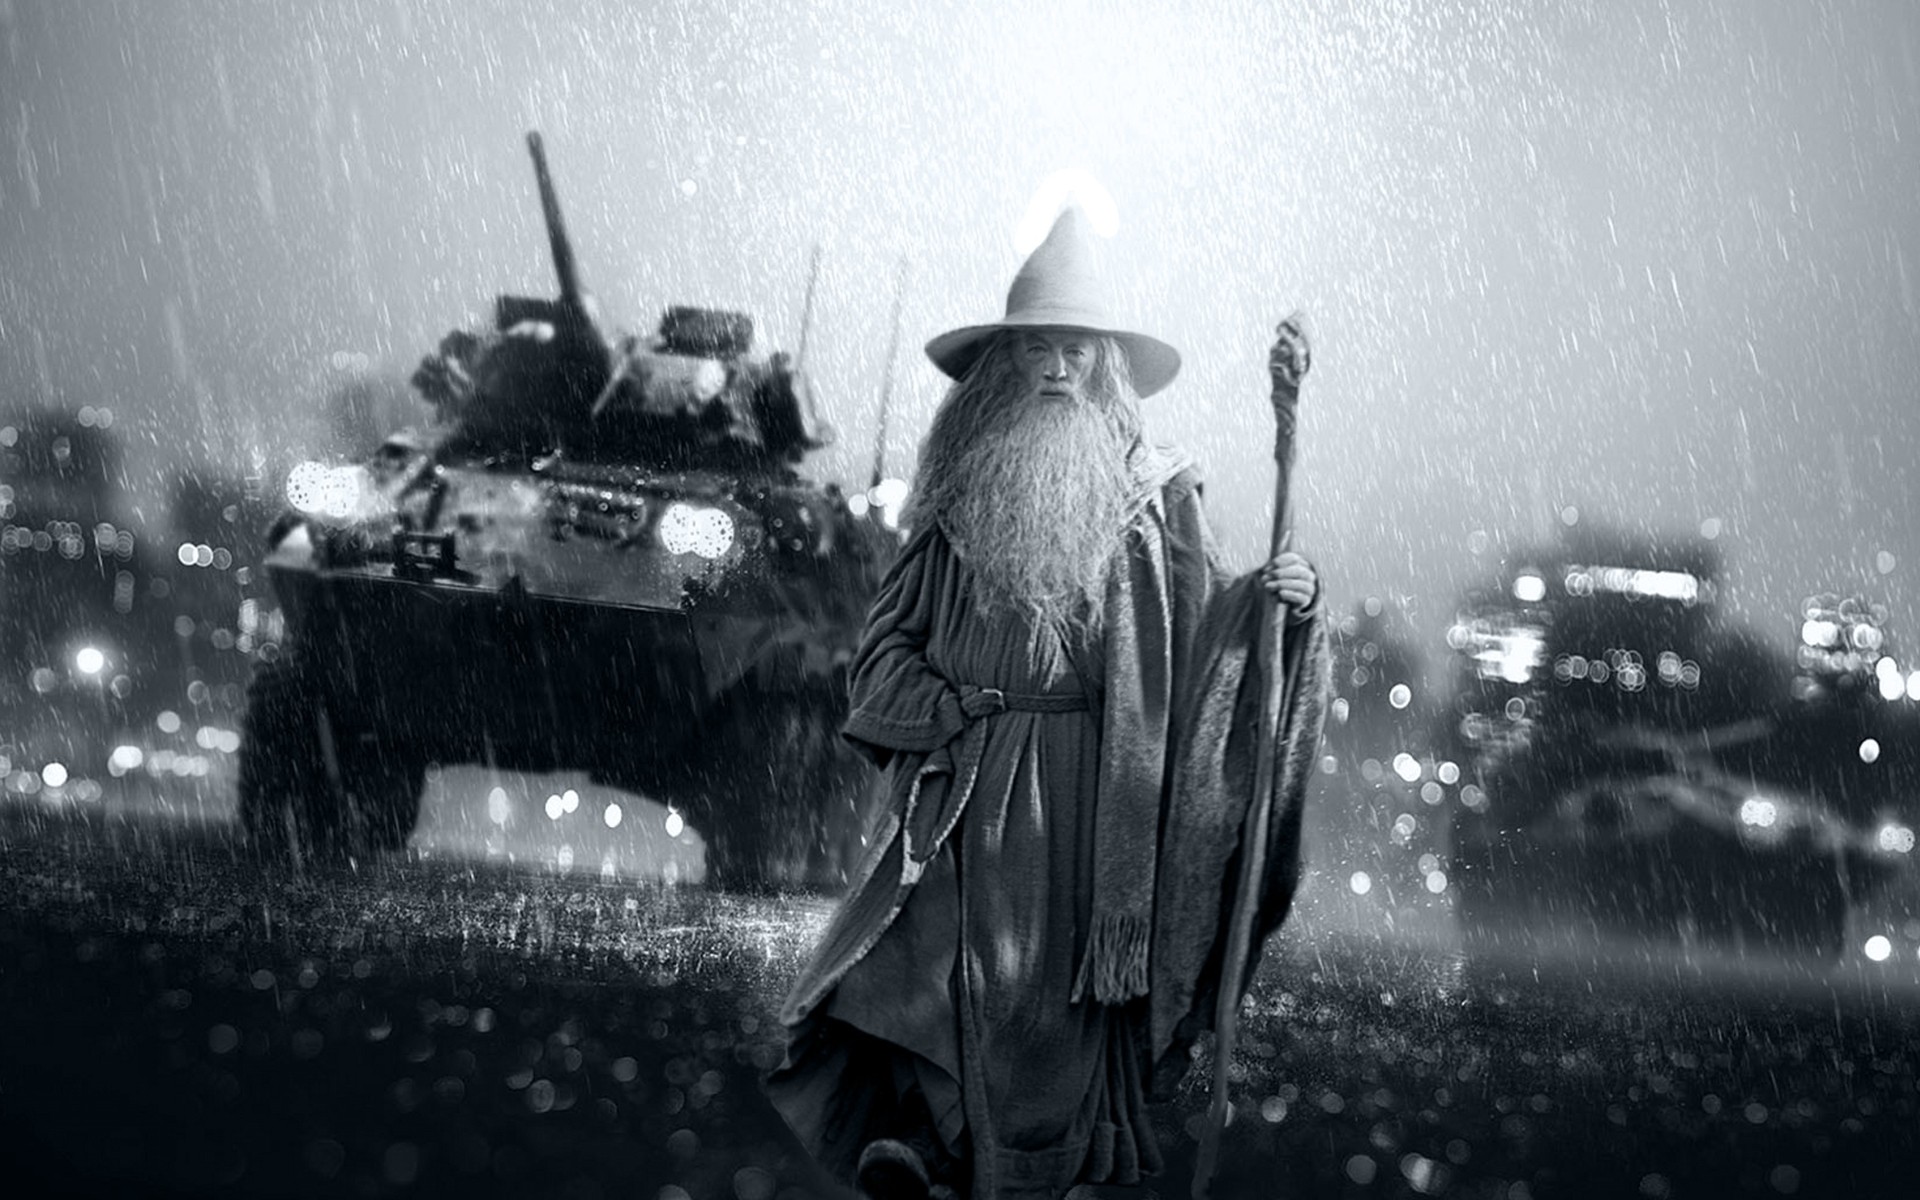 General 1920x1200 Gandalf monochrome video games Battlefield (game) Battlefield 4 The Lord of the Rings wizard PC gaming